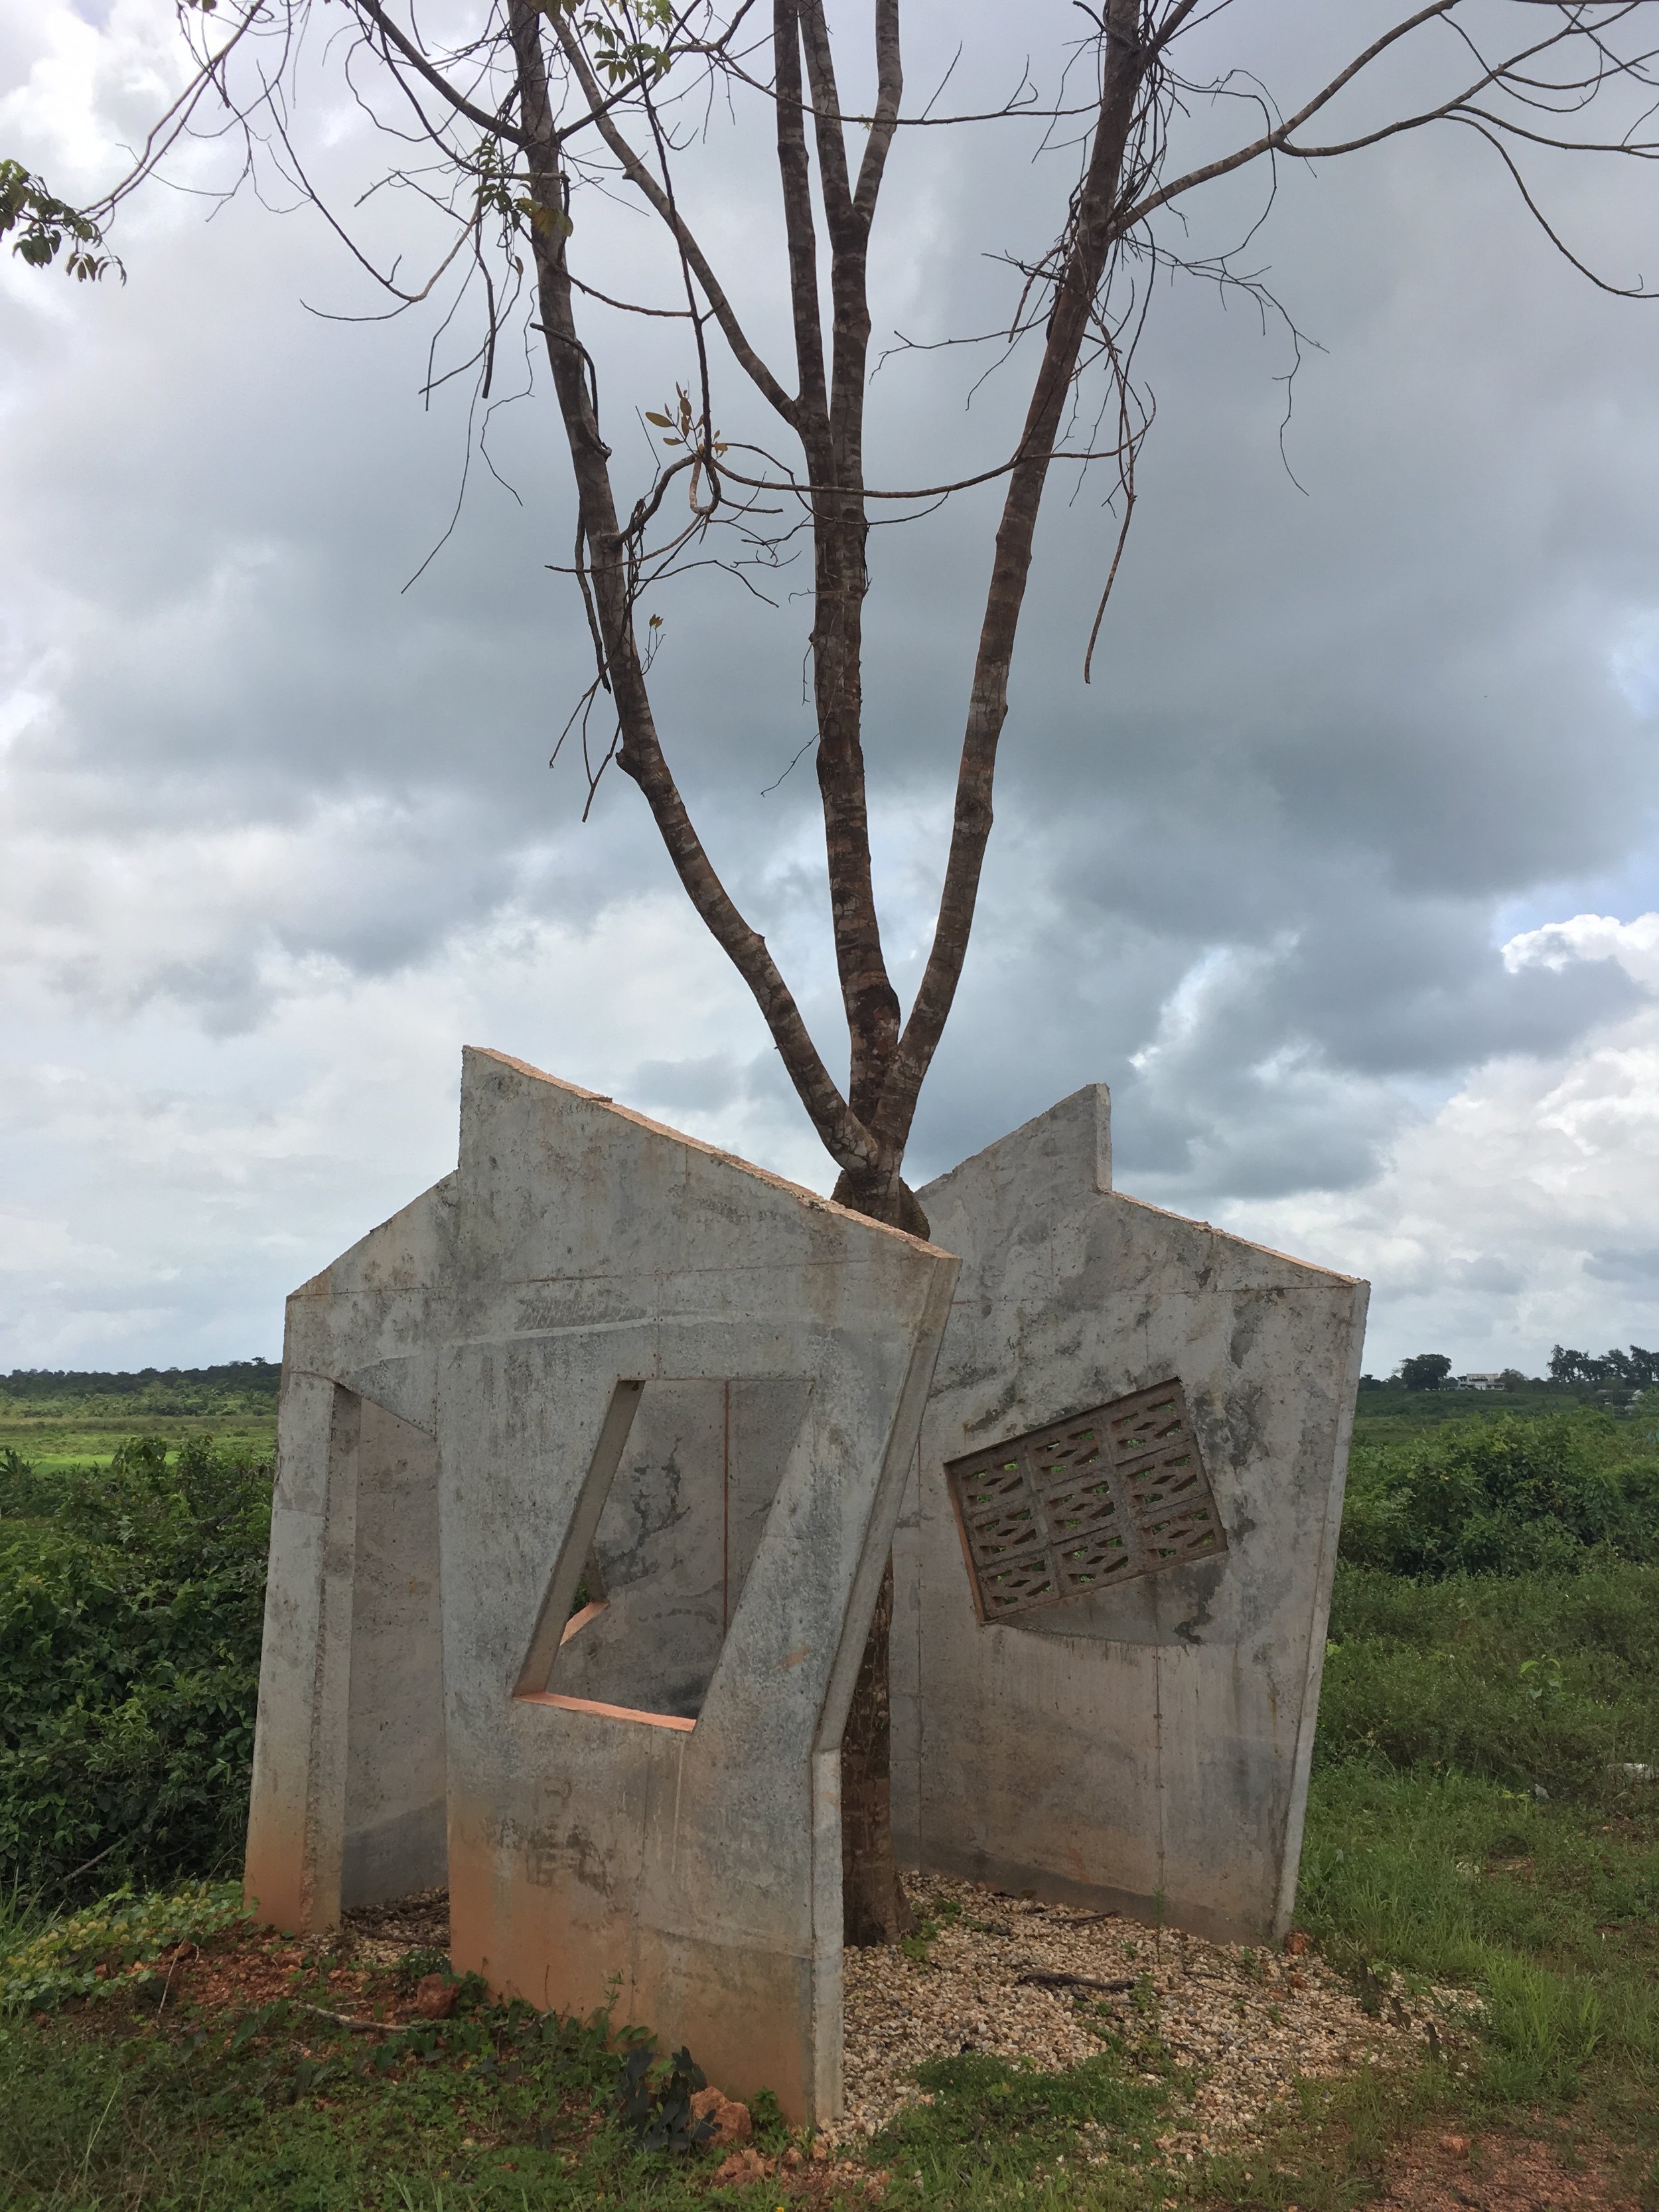  Dutch artist Feiko Becker's  Afu-Osu  (half-house in Ndyuka) was a part of the artist's broader reflection on failure. He noticed many unfinished houses in Moengo and thought these were failed projects. When he later discovered that it often takes a